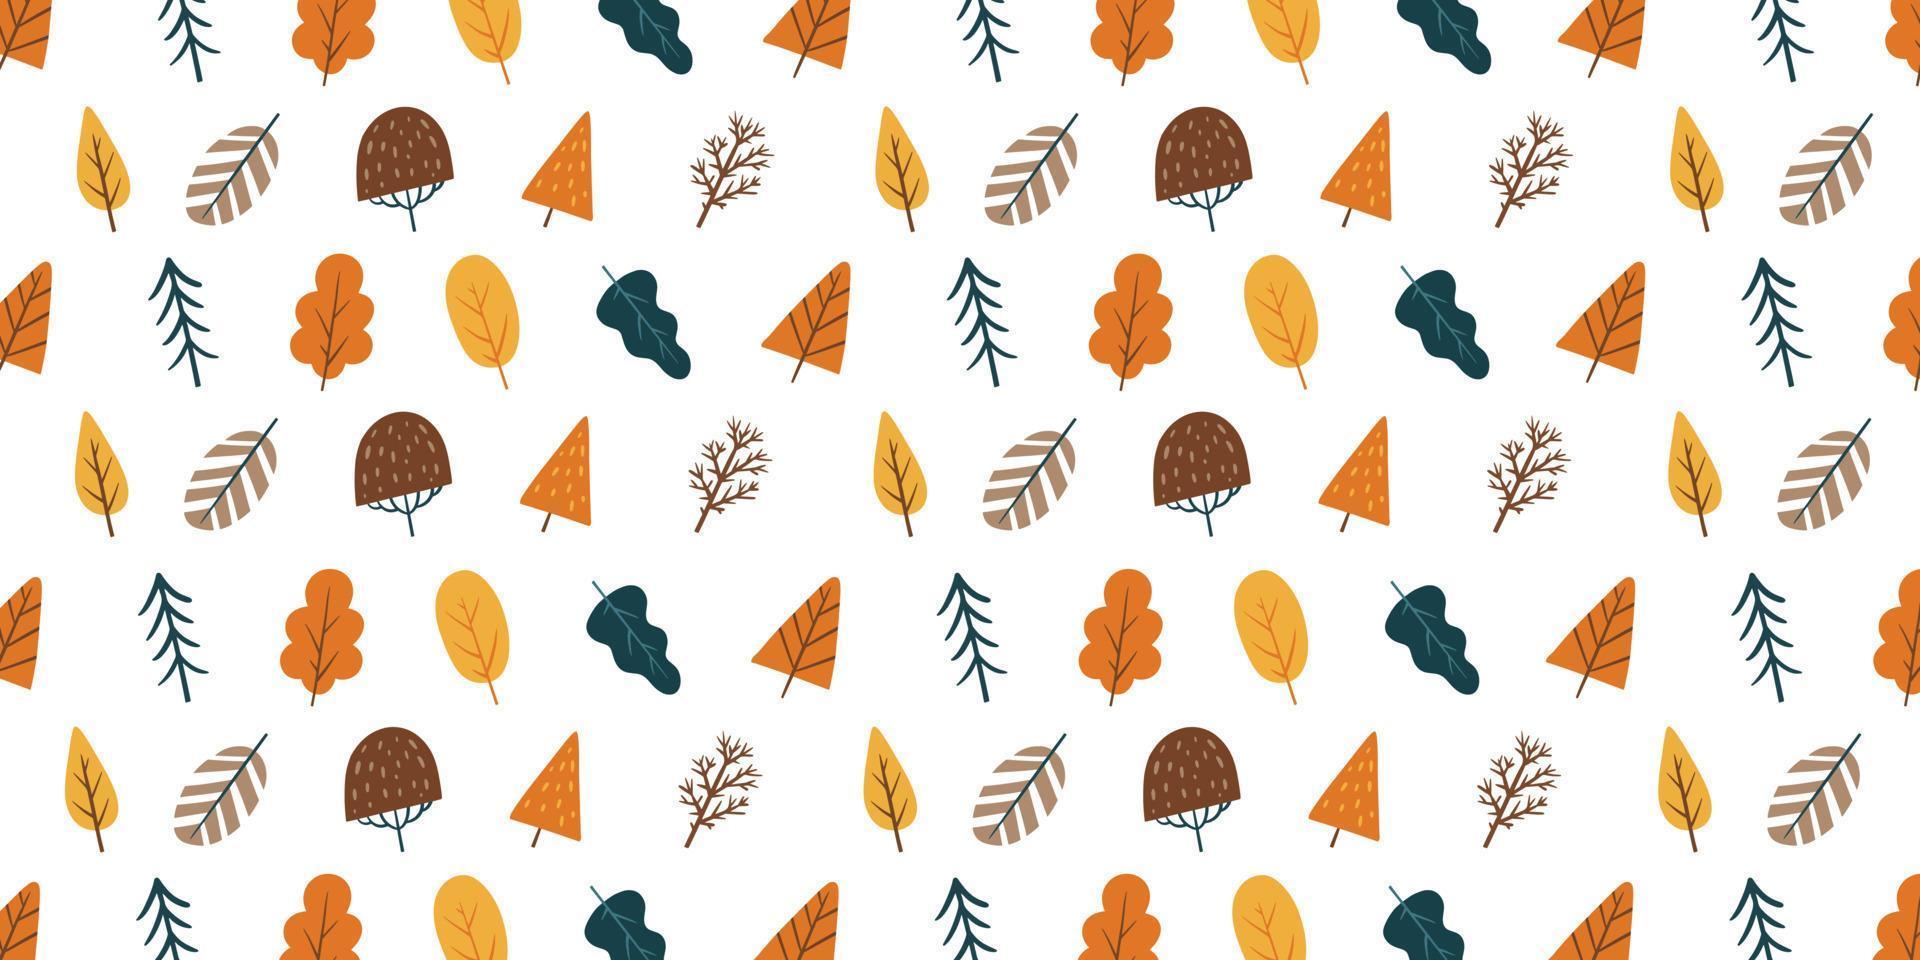 Set of cute tree for autumn pattern background design element. Collection of simple cartoon of nature hand drawn illustration vector